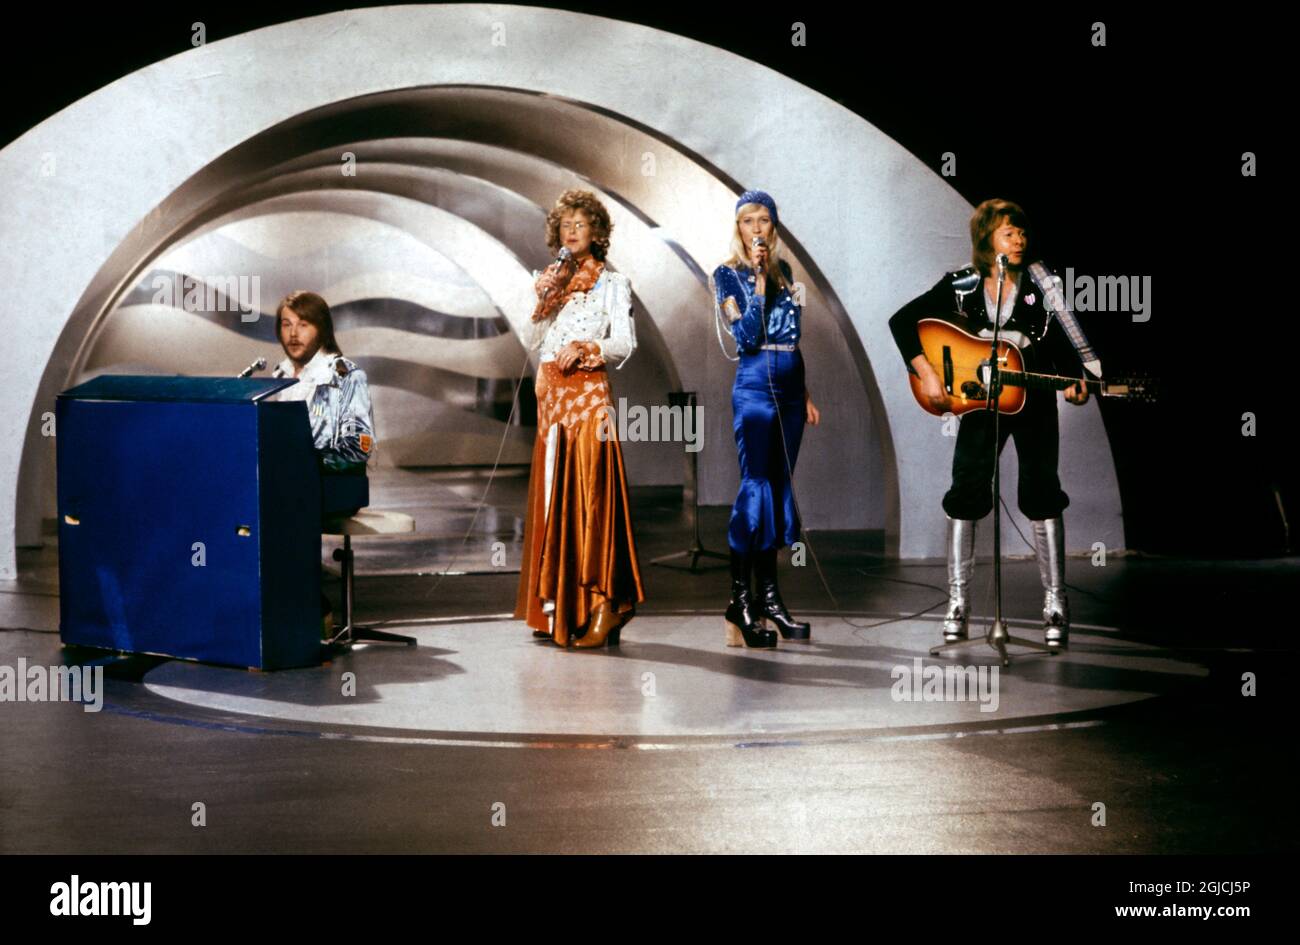 Picture taken on February 9, 1974 at a studio in Stockholm shows the  Swedish pop group Abba with its members (L-R) Benny Andersson, Anni-Frid  Lyngstad, Agnetha Faltskog and Bjorn Ulvaeus during the